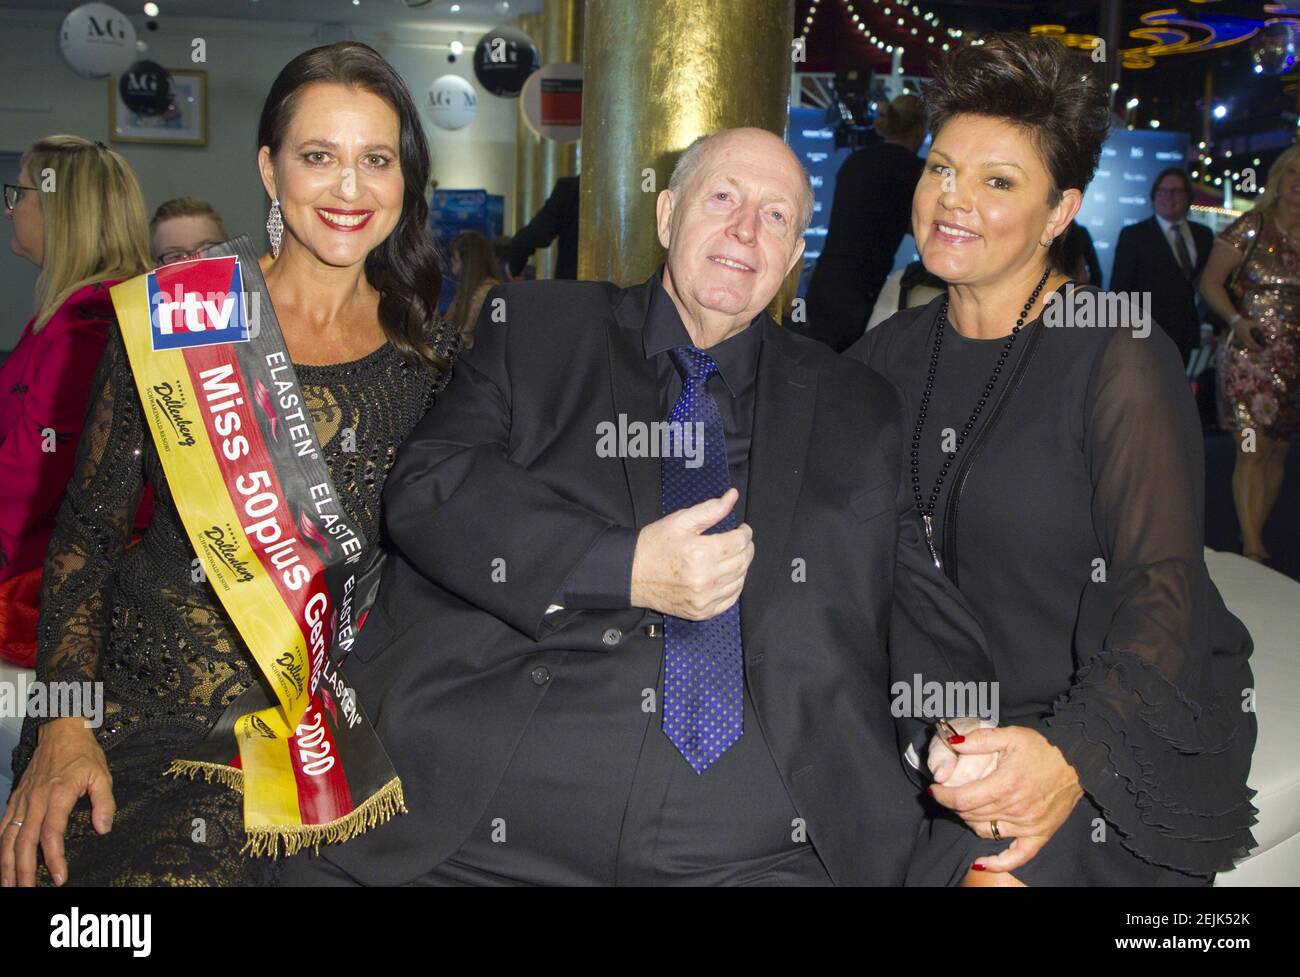 Rust, Germany - February 15, 2020: Miss Germany Beauty Pageant Election at Europa-Park with Reiner Calmund, Miss Germany CEO Ines Klemmer and Miss 50plus (Photo by Mandoga Media/Sipa USA) Stock Photo